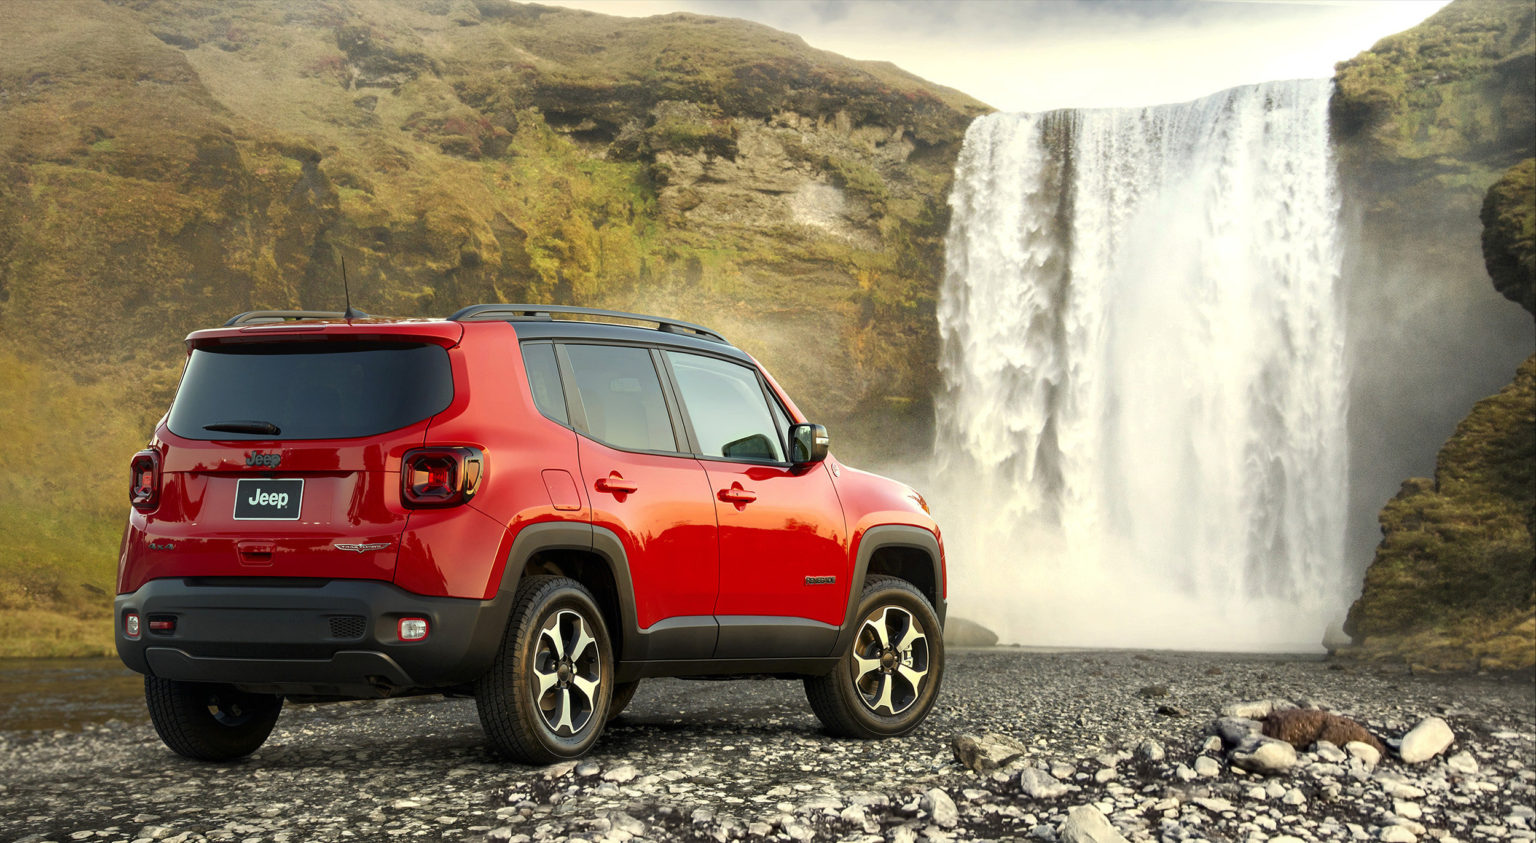 The Jeep Renegade returns for the 2020 model year with minor changes.